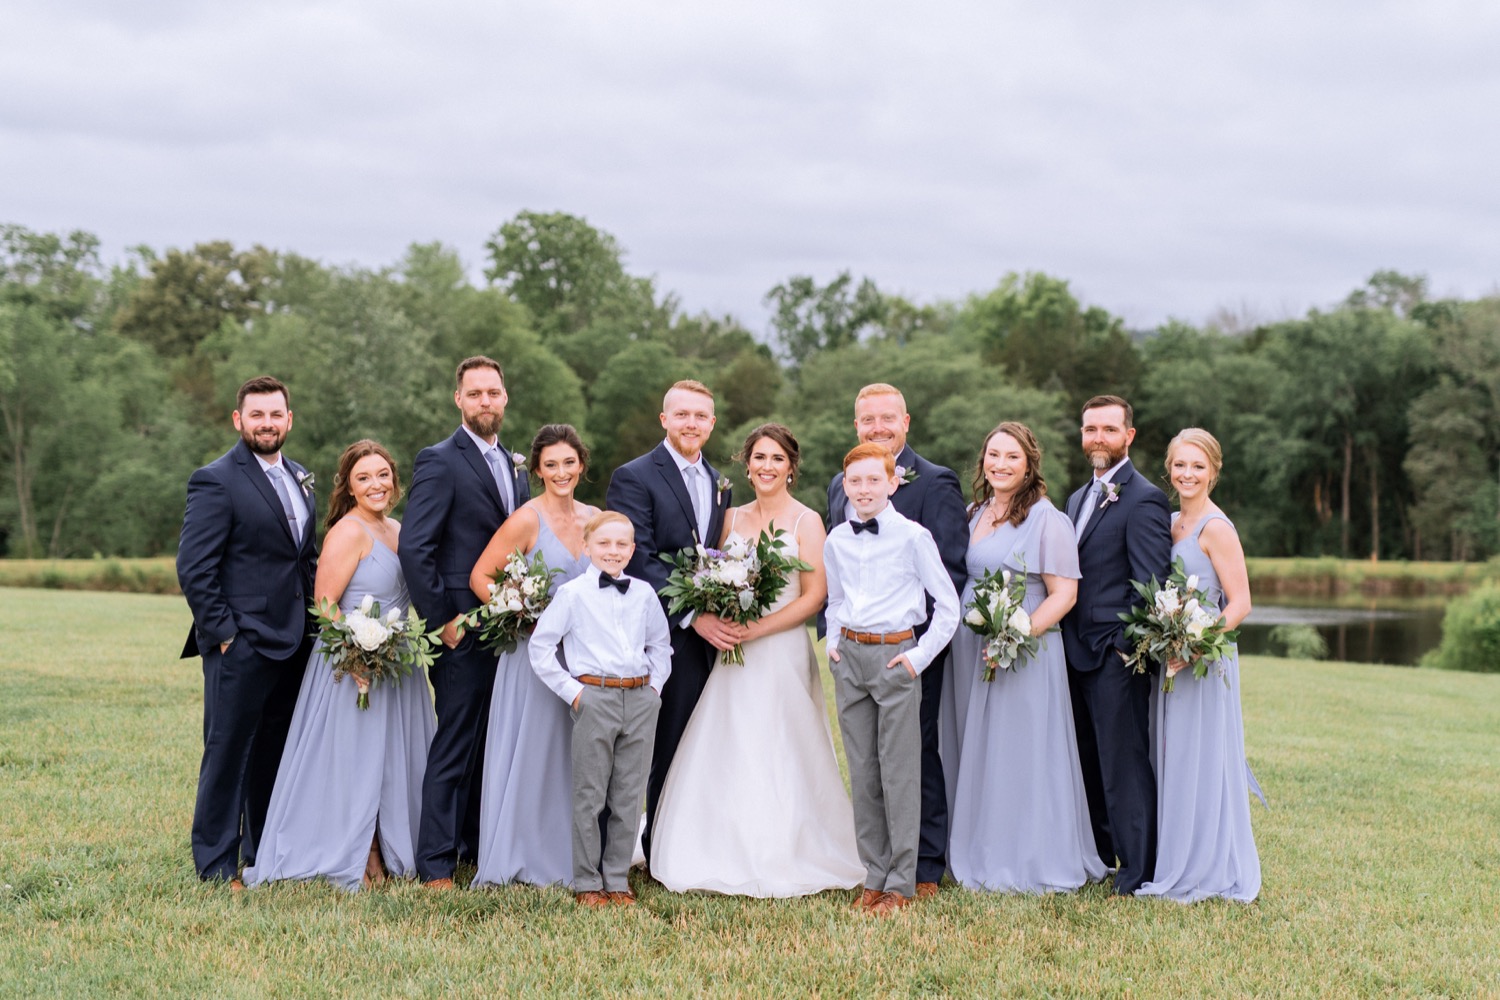 Entire wedding party before wedding ceremony in Charlottesville, VA